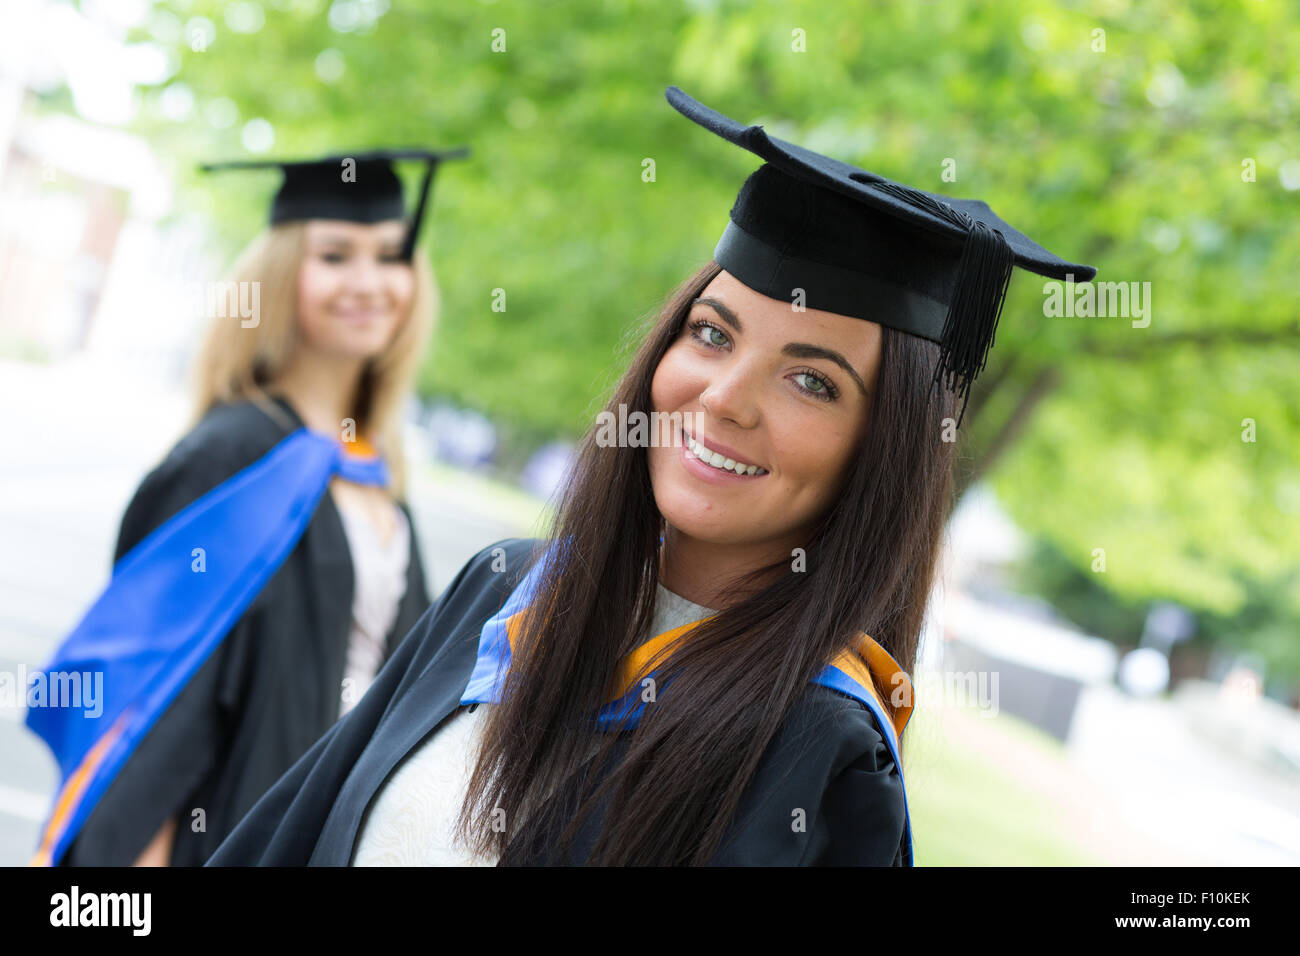 Female College Graduate in Cap and Gown Stock Photo - Image of